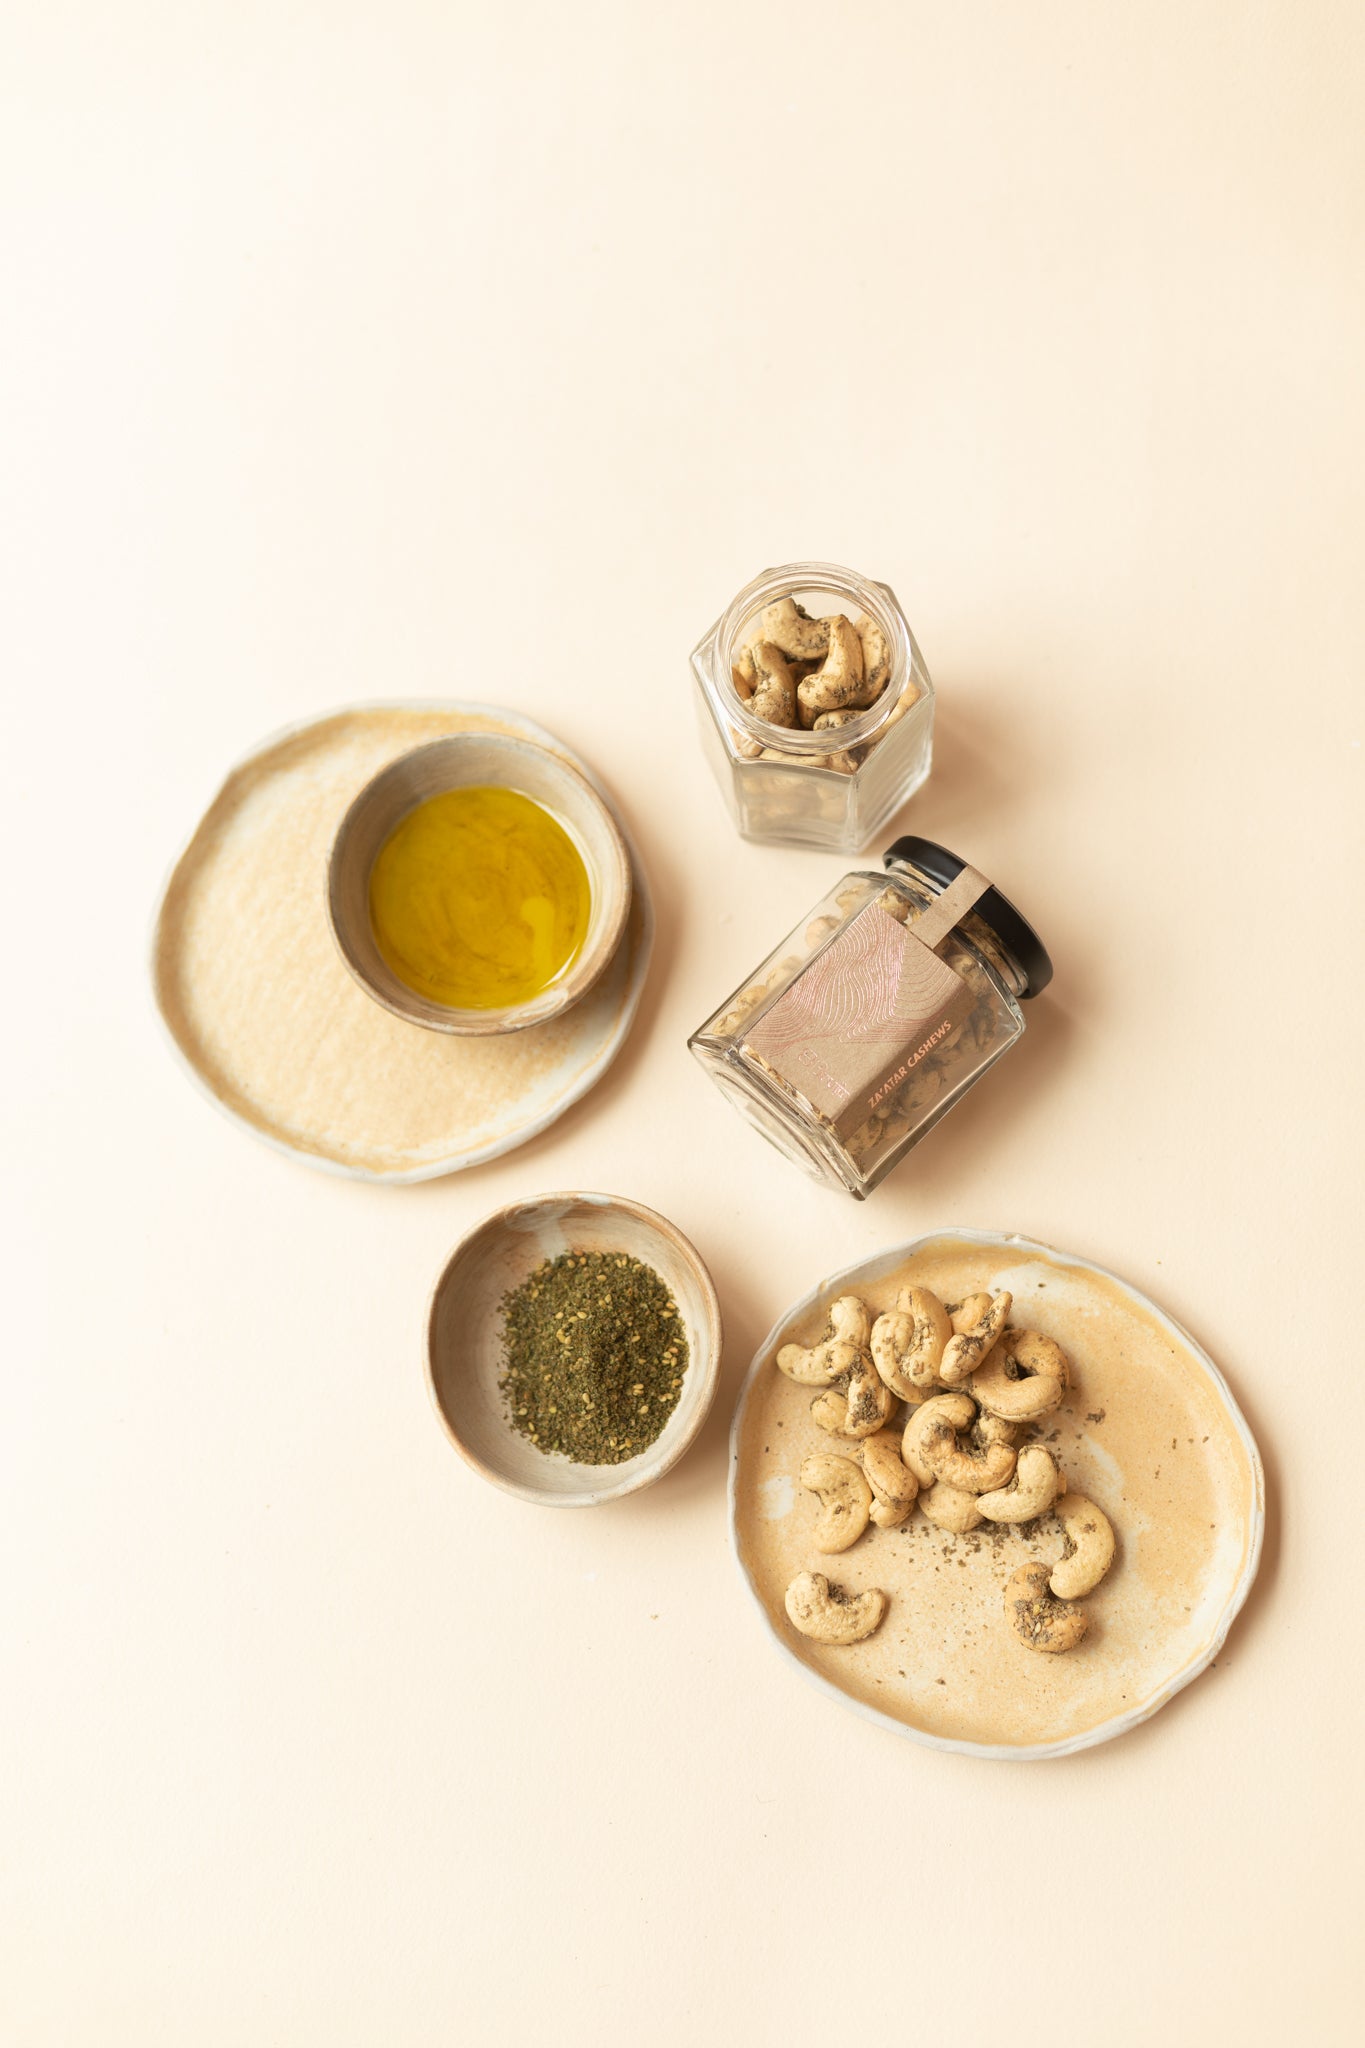 savoury, Indian cashews generously flavored with Za’atar, perfect for mezze platters